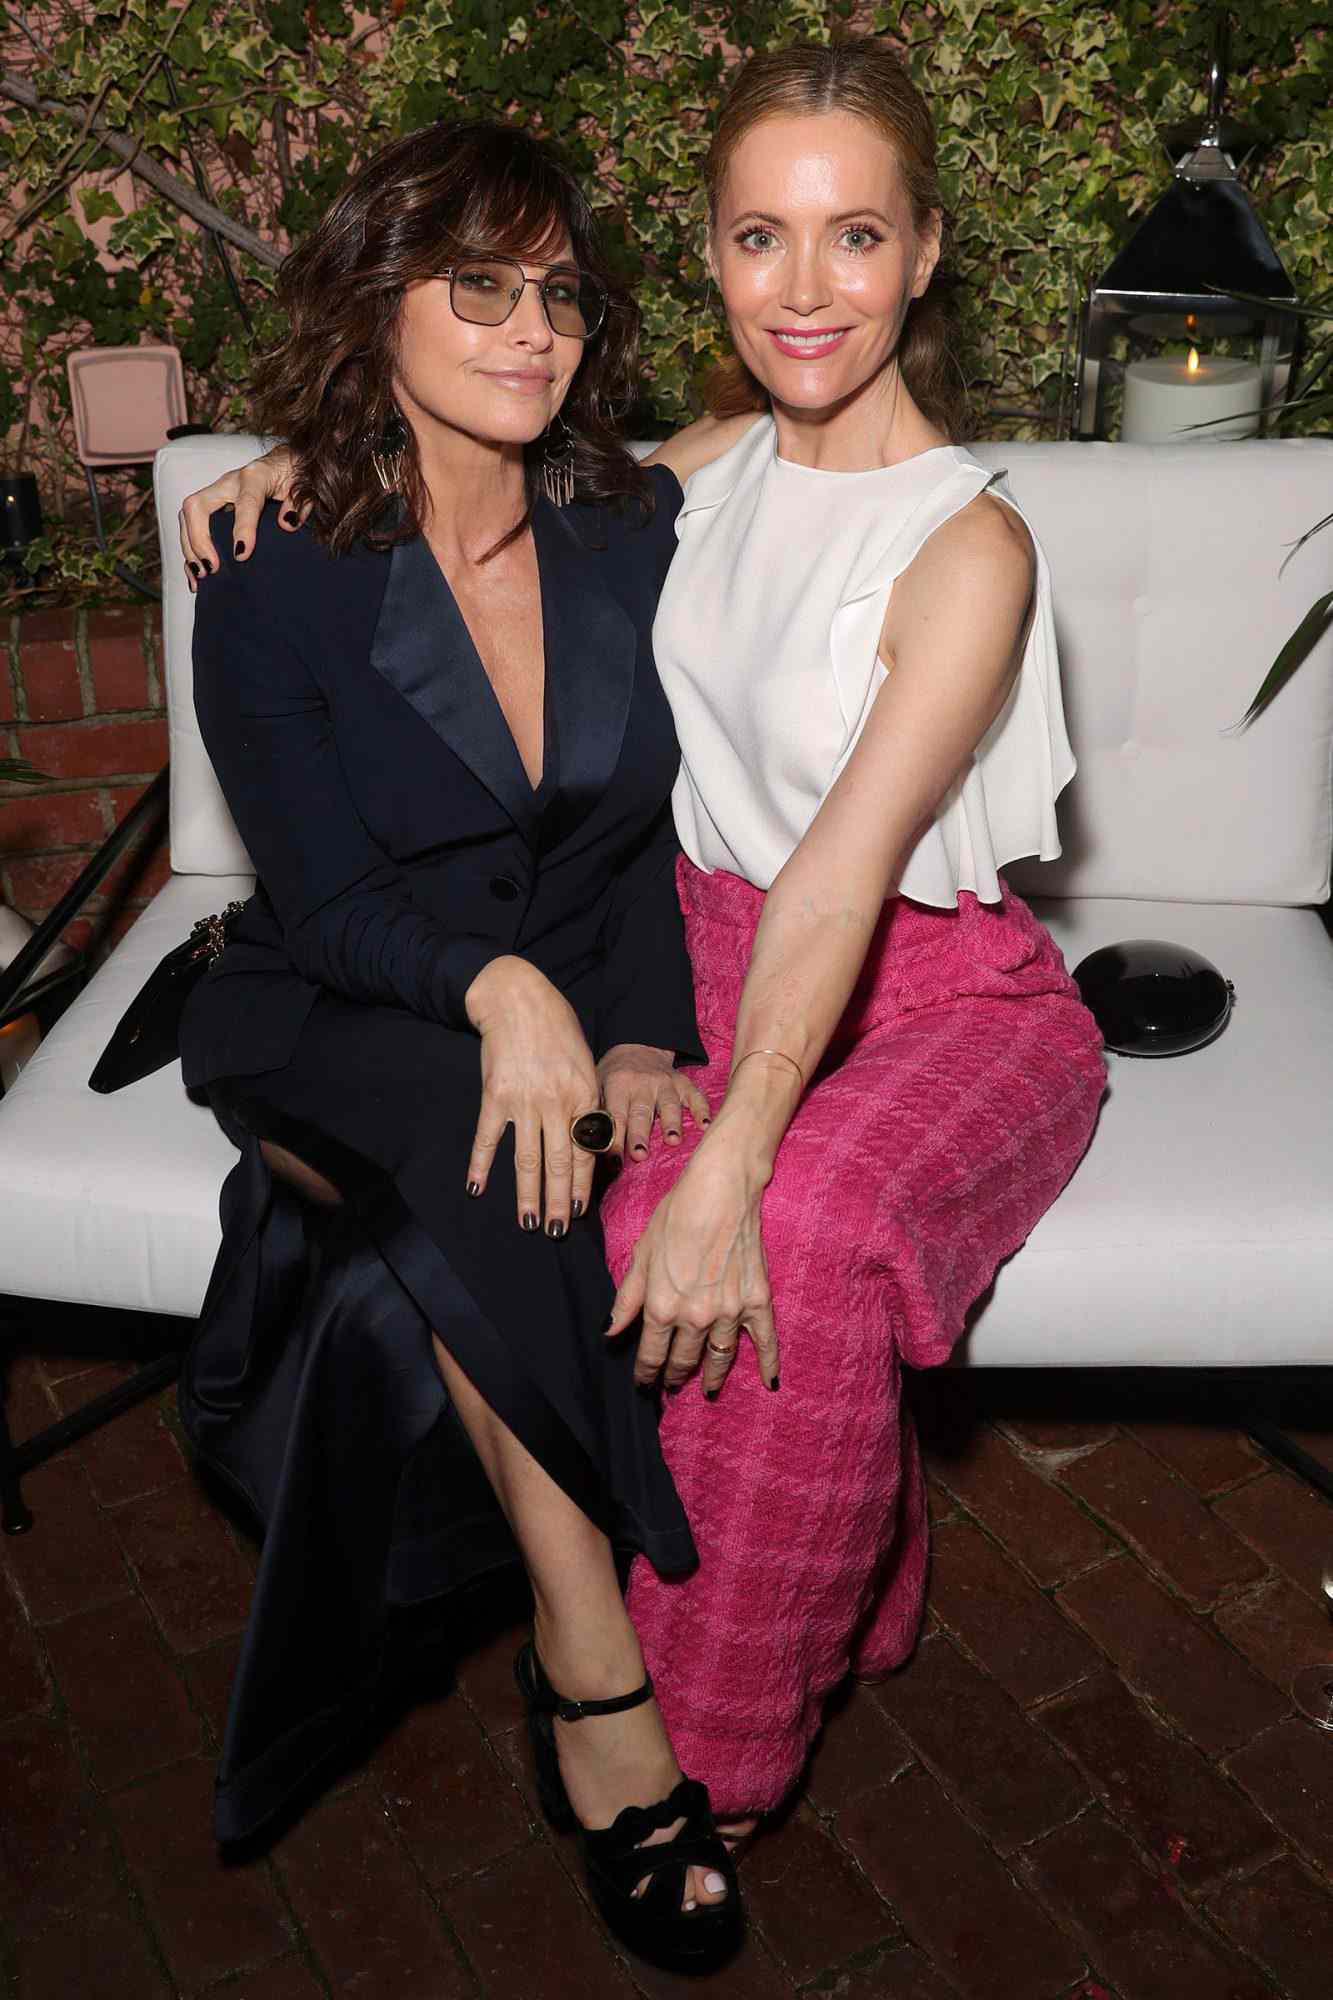 <p>at the Chanel and Charles Finch Pre-Oscar Awards Dinner at the Polo Lounge in Beverly Hills on Saturday.</p>
                            